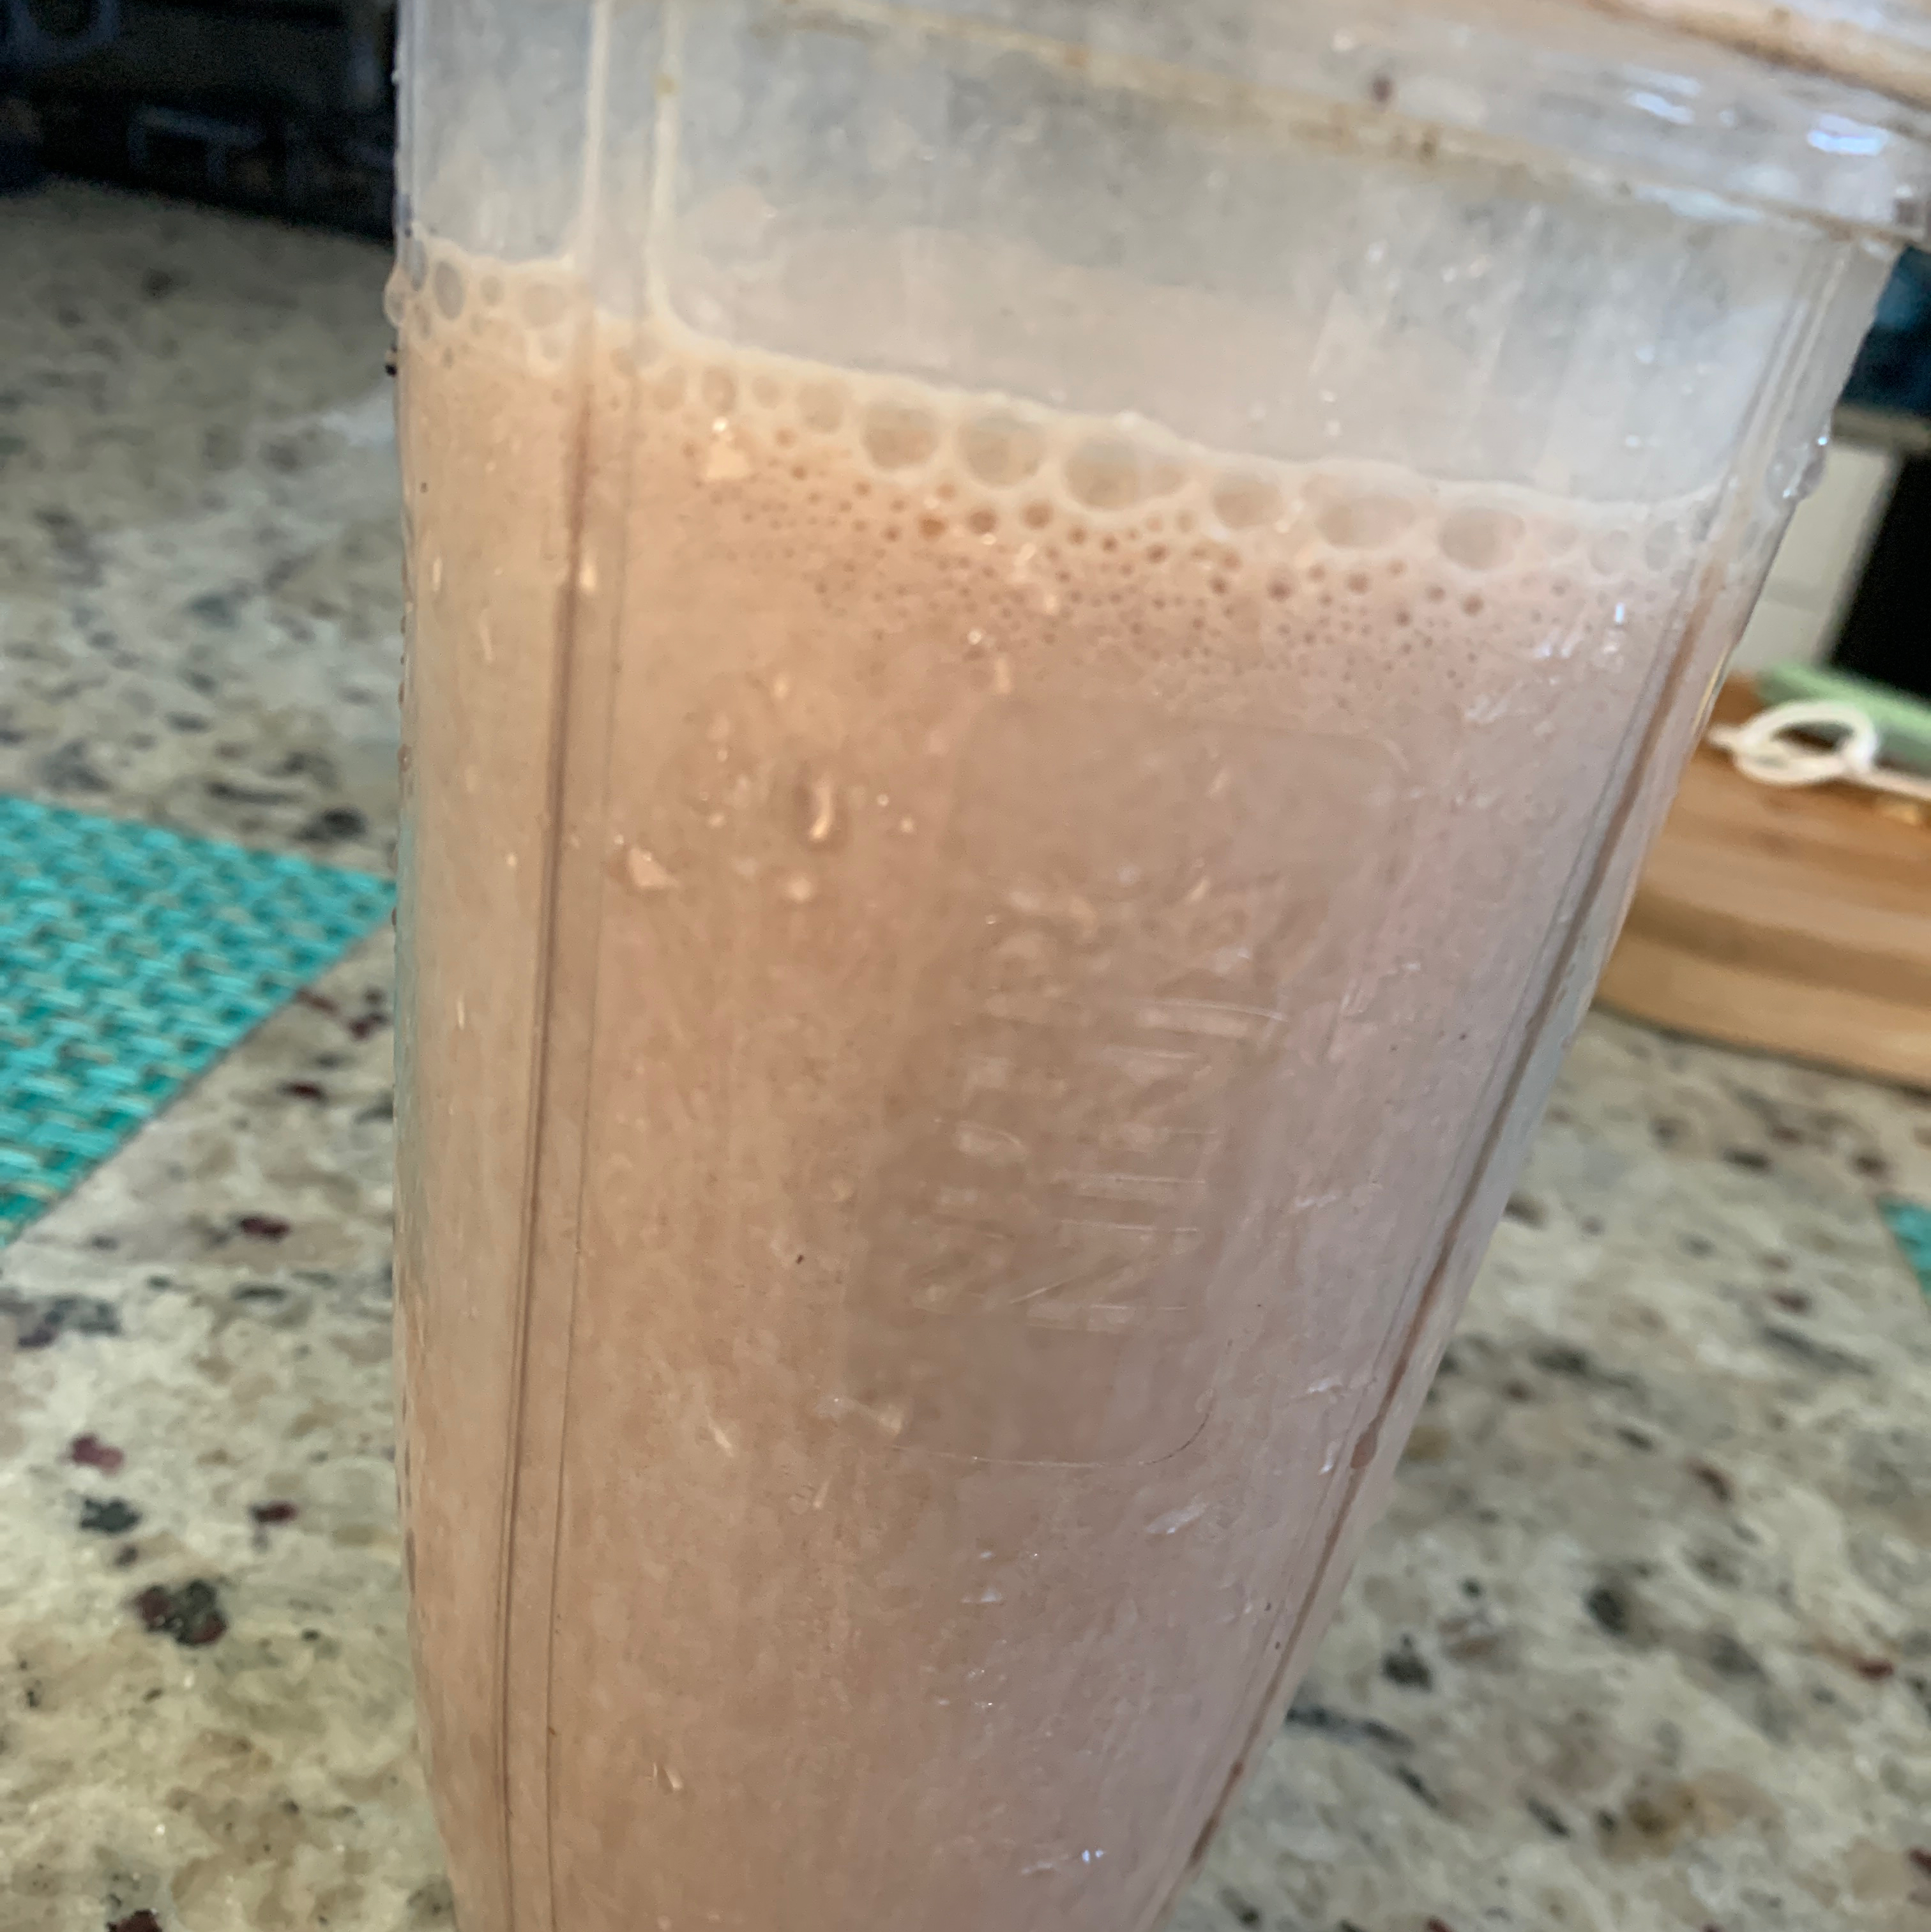 The Best Post Workout Shake